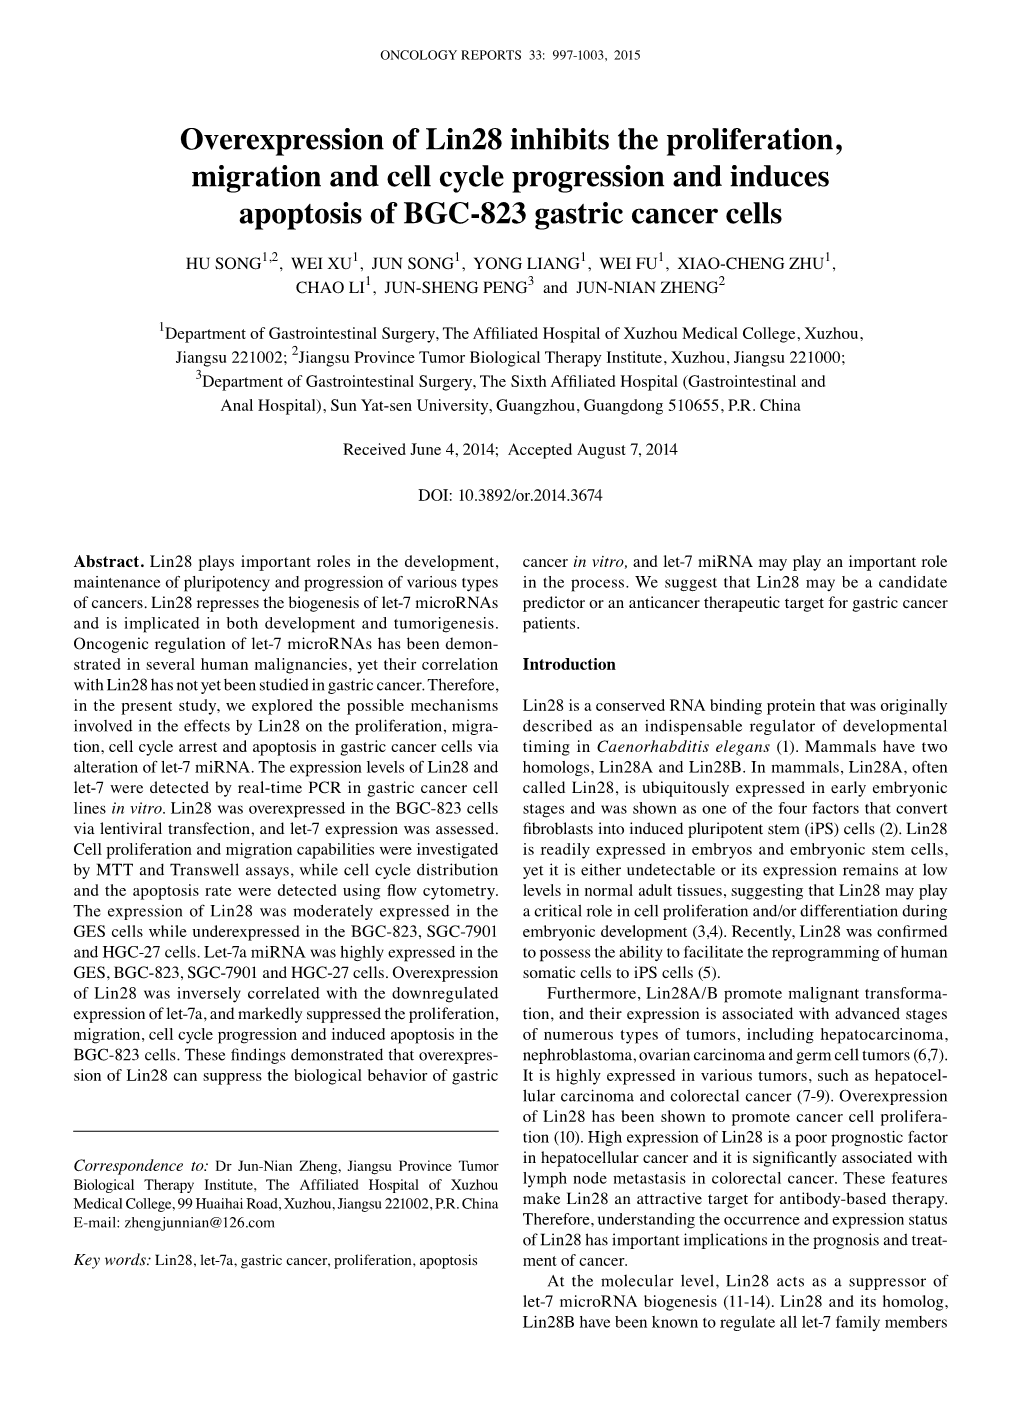 Overexpression of Lin28 Inhibits the Proliferation, Migration and Cell Cycle Progression and Induces Apoptosis of BGC-823 Gastric Cancer Cells